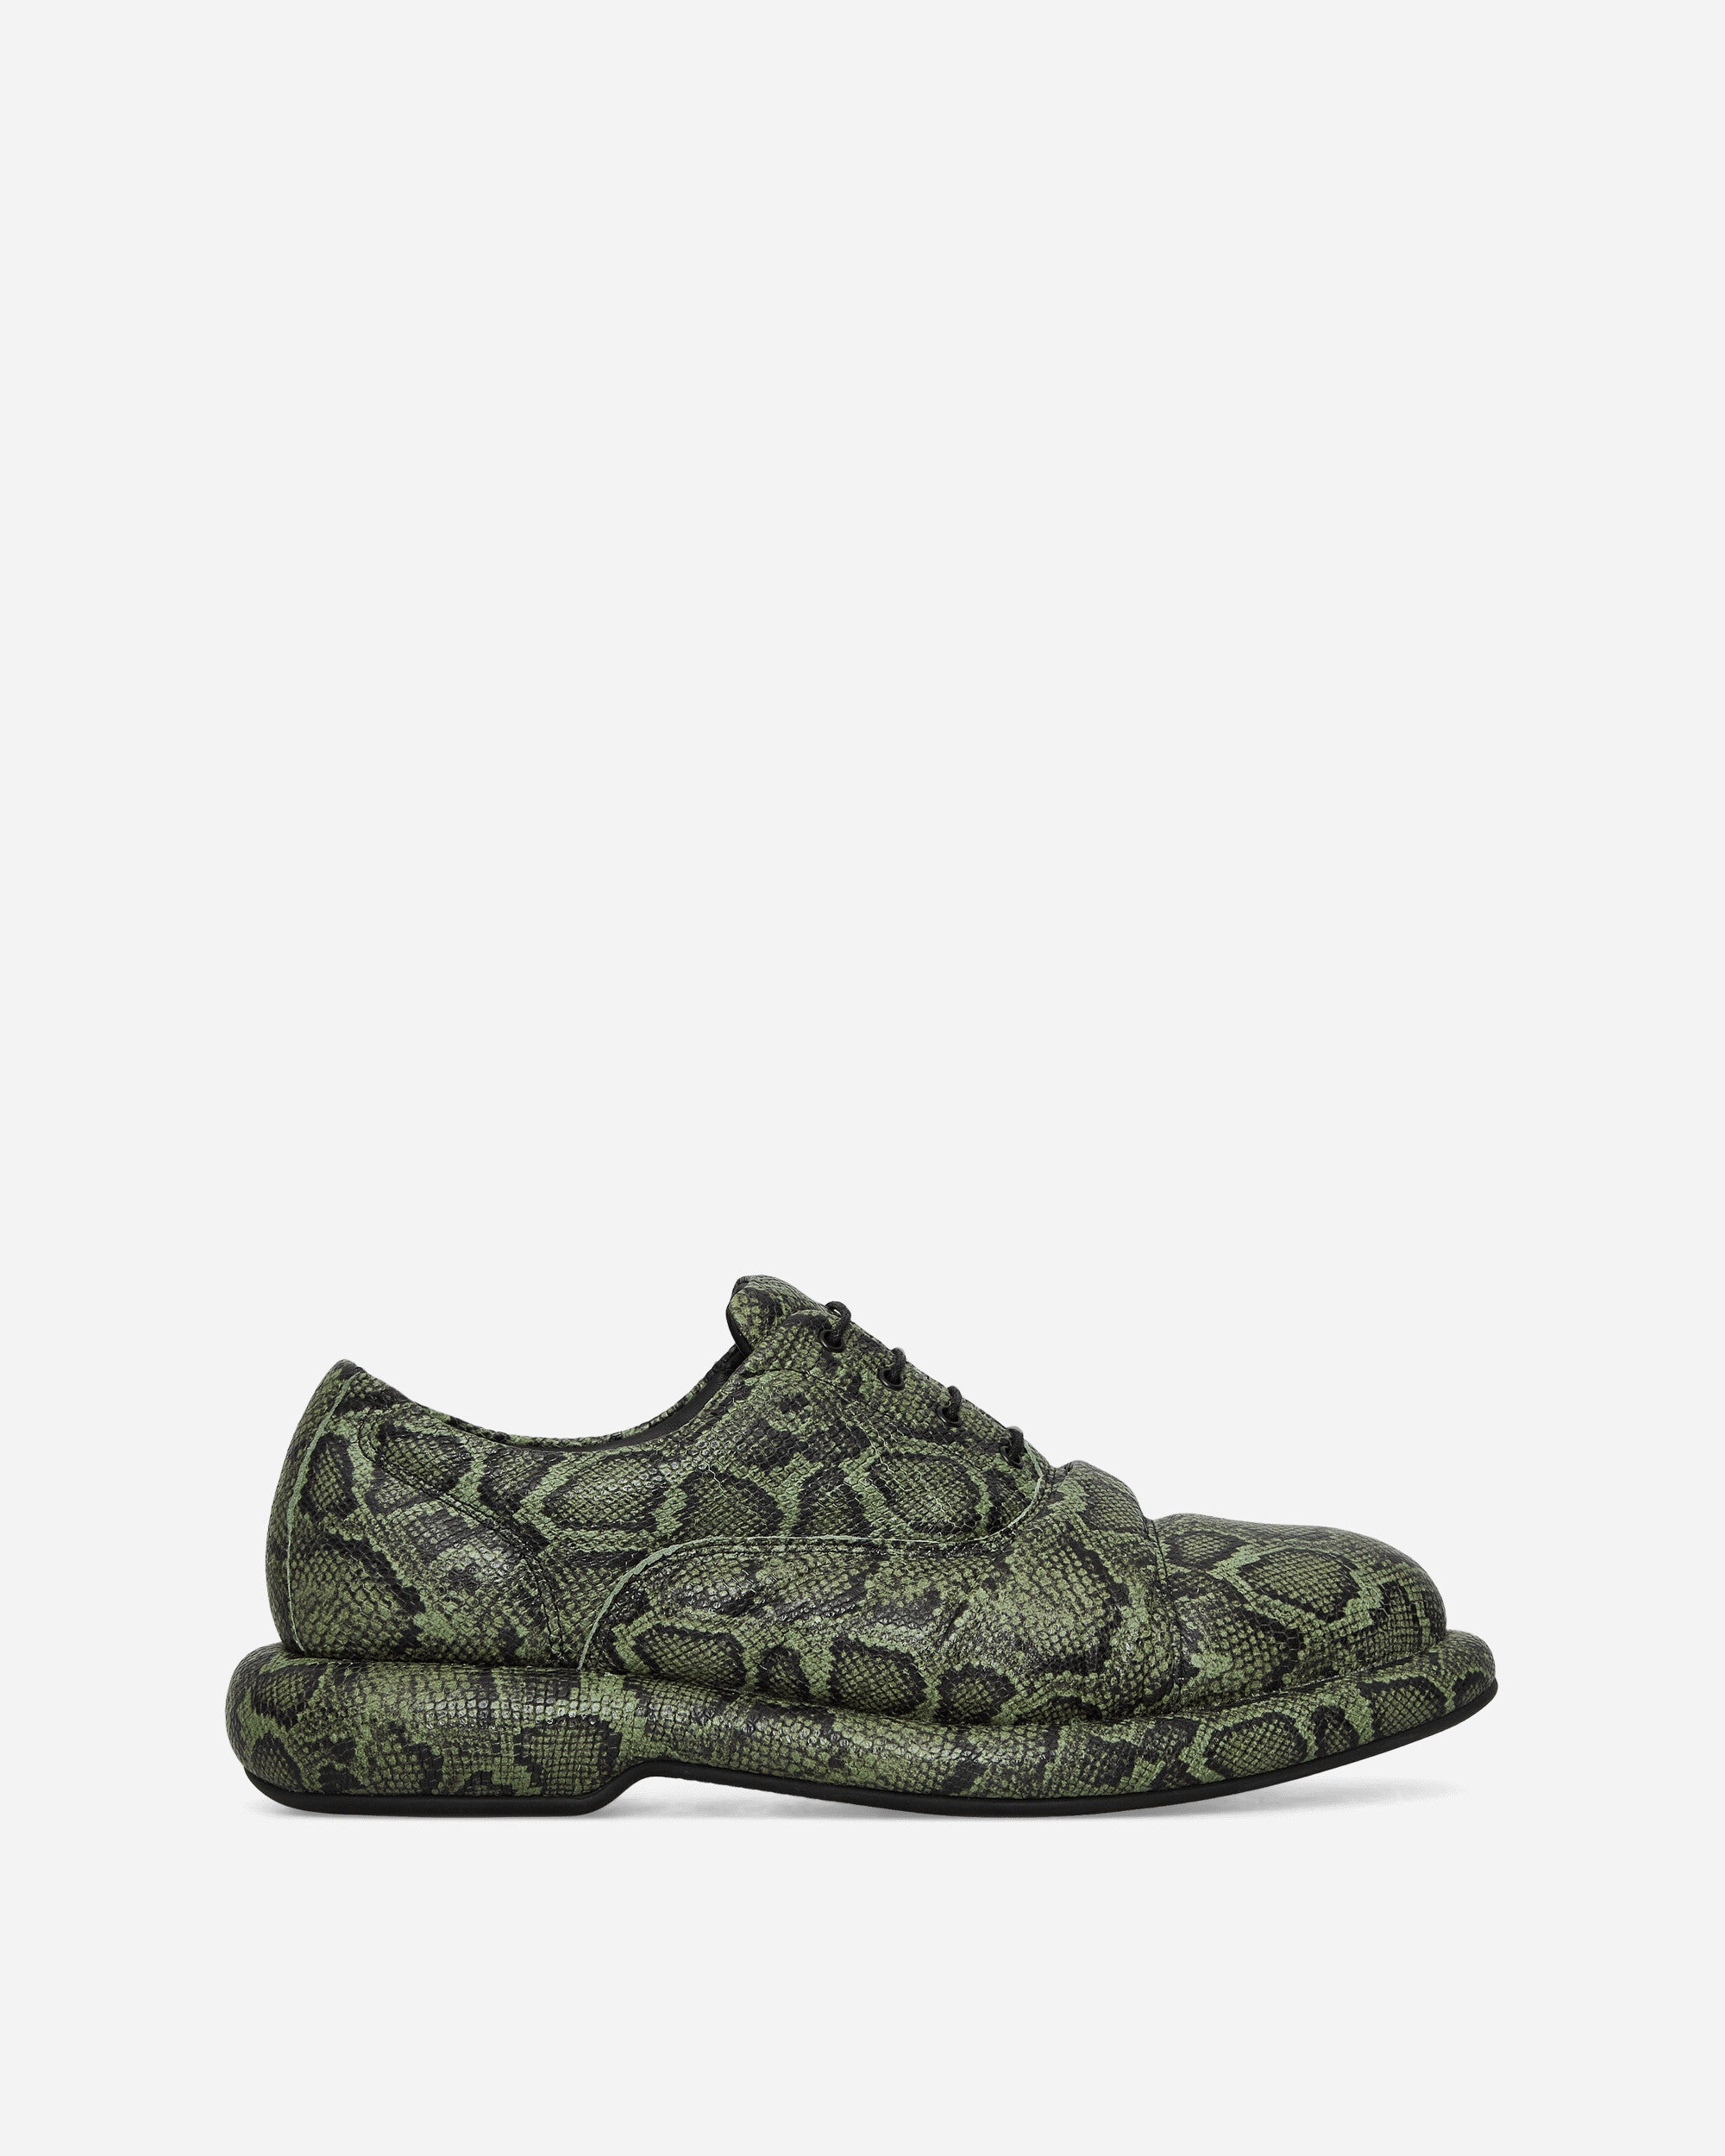 Martine Rose WMNS Leather Oxford Green Snake